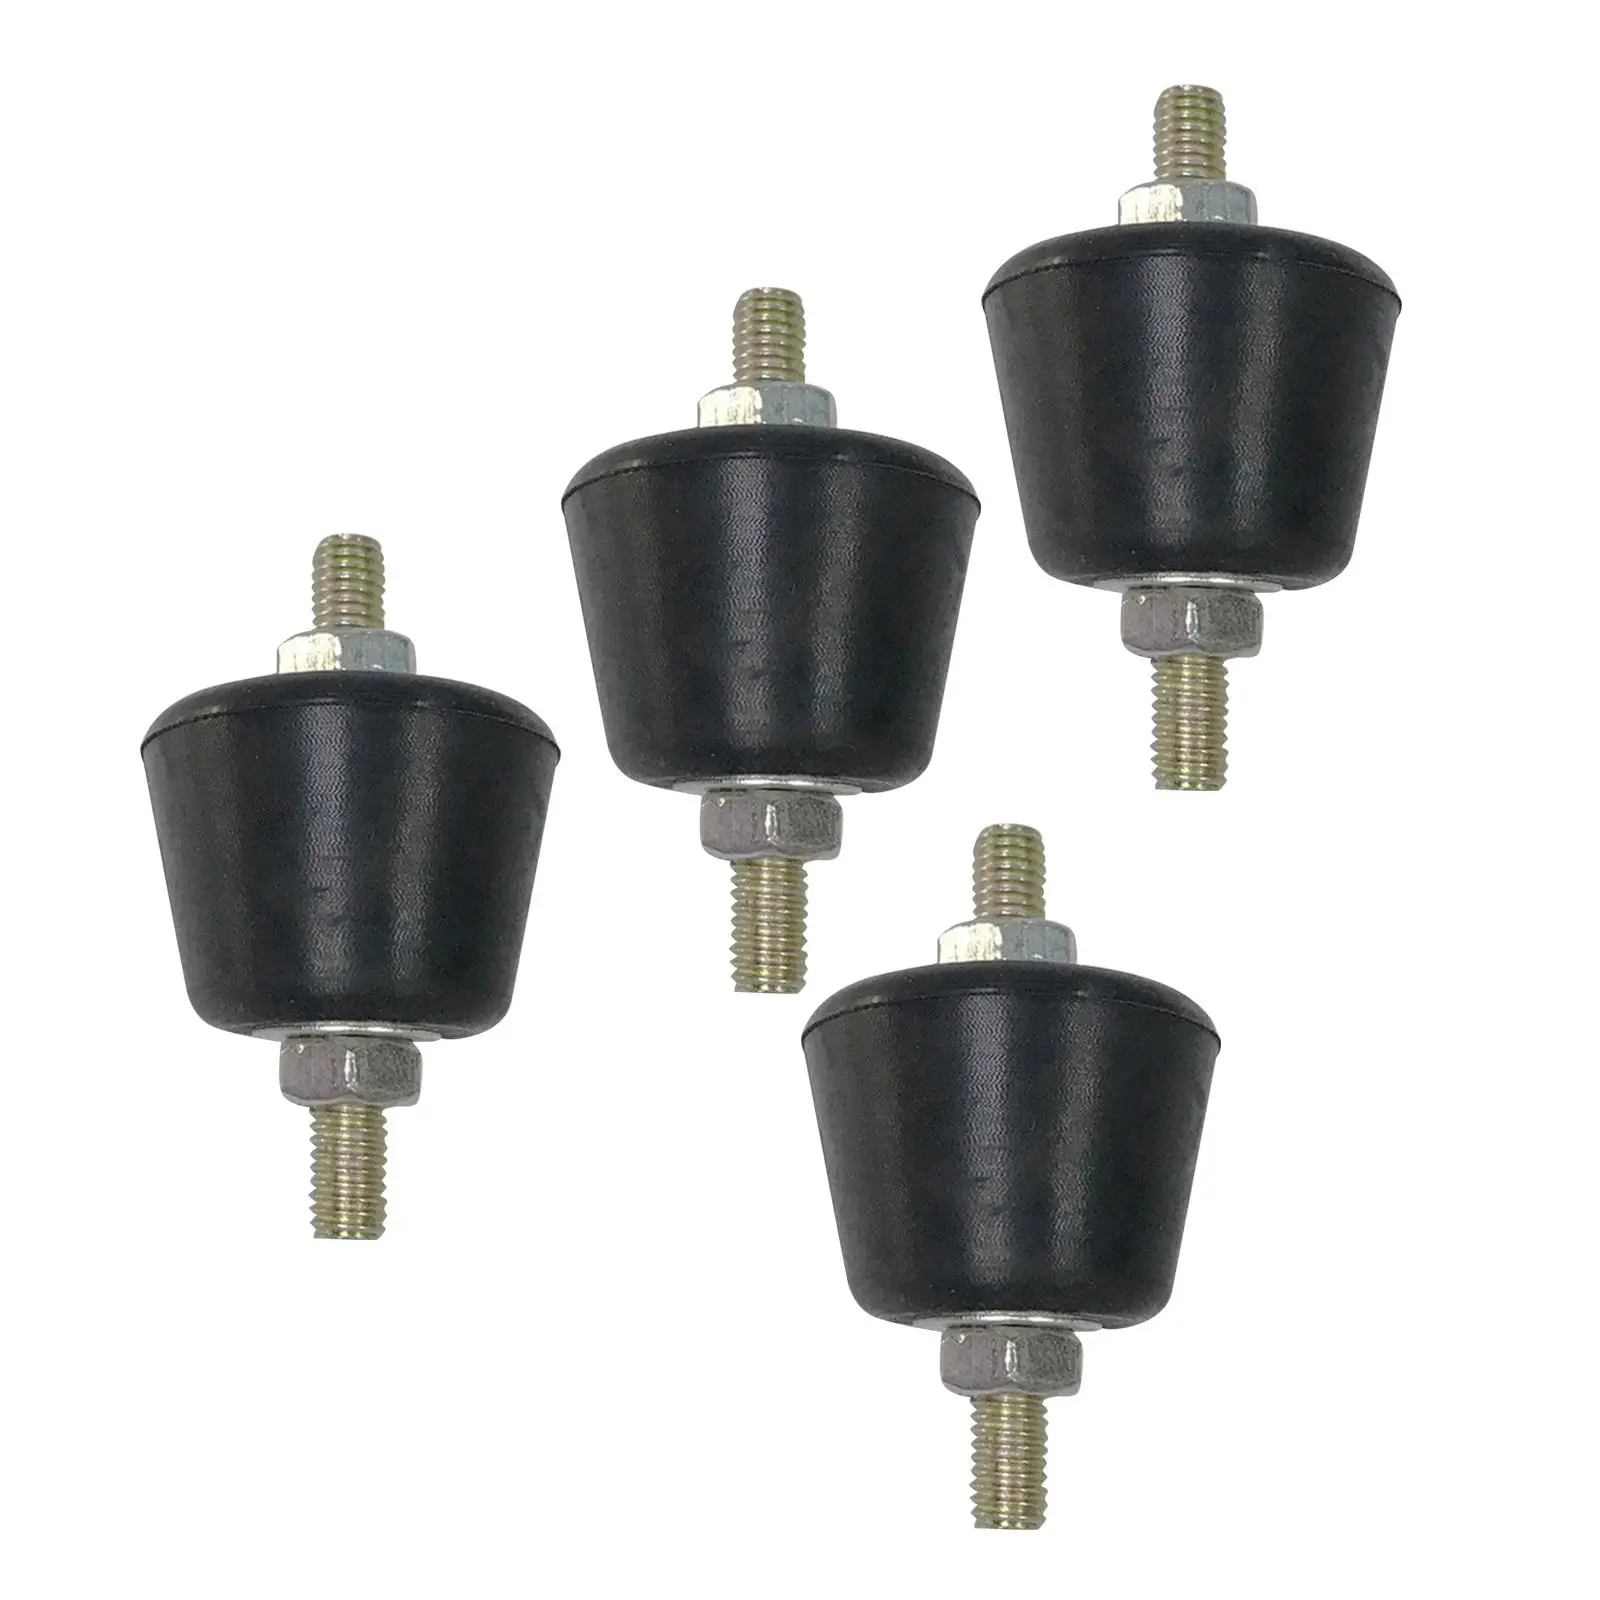 

Set of 4 Vibration Rubber Isolator Anti Slip Durable Shock Absorber Mounting Rubber Isolator for Air Conditioner Outdoor Unit